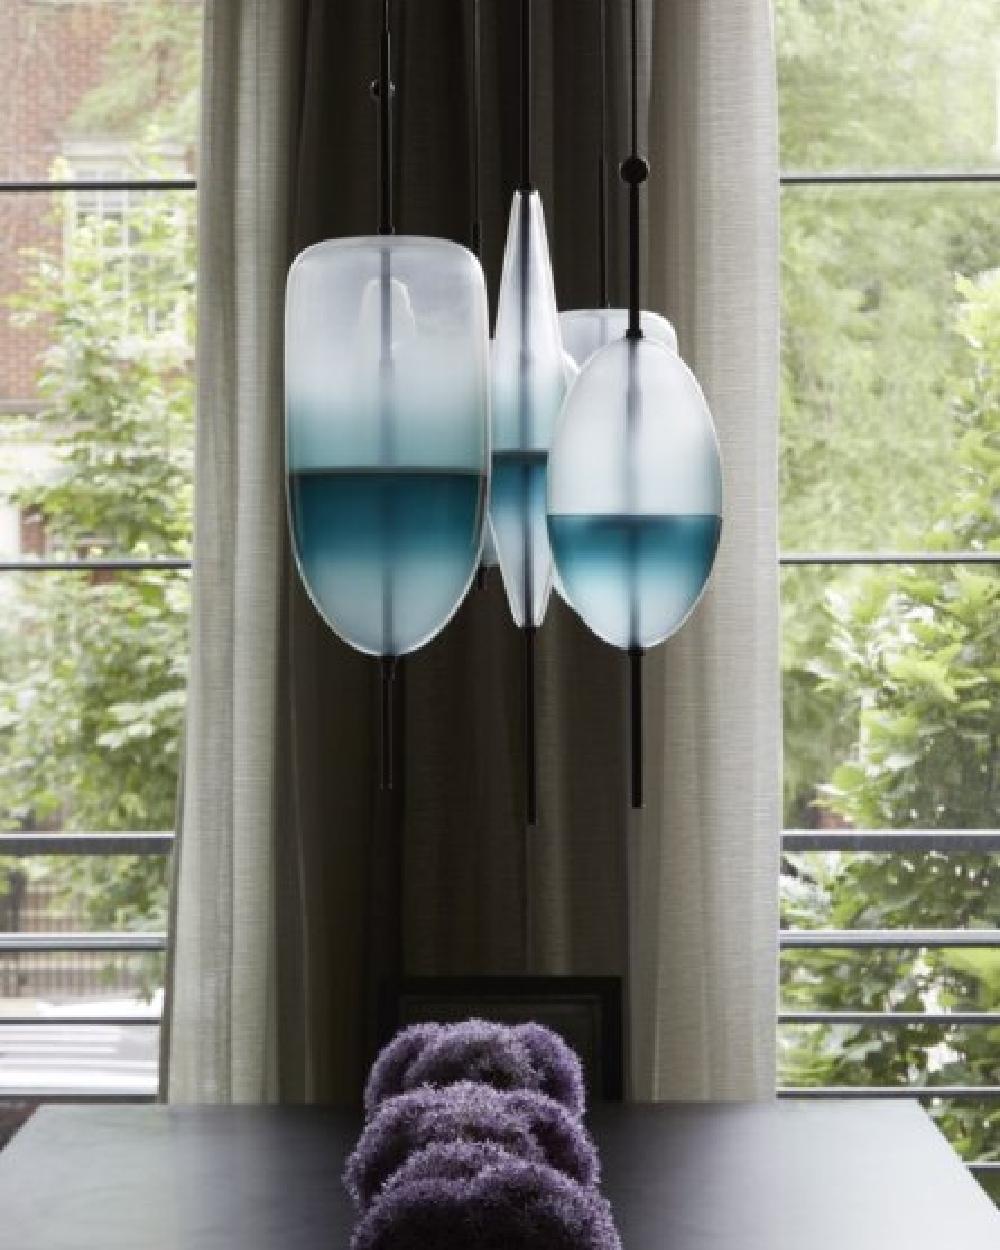 FLOW[T] S2 Pendant lamp in Turquoise by Nao Tamura for Wonderglass For Sale 4